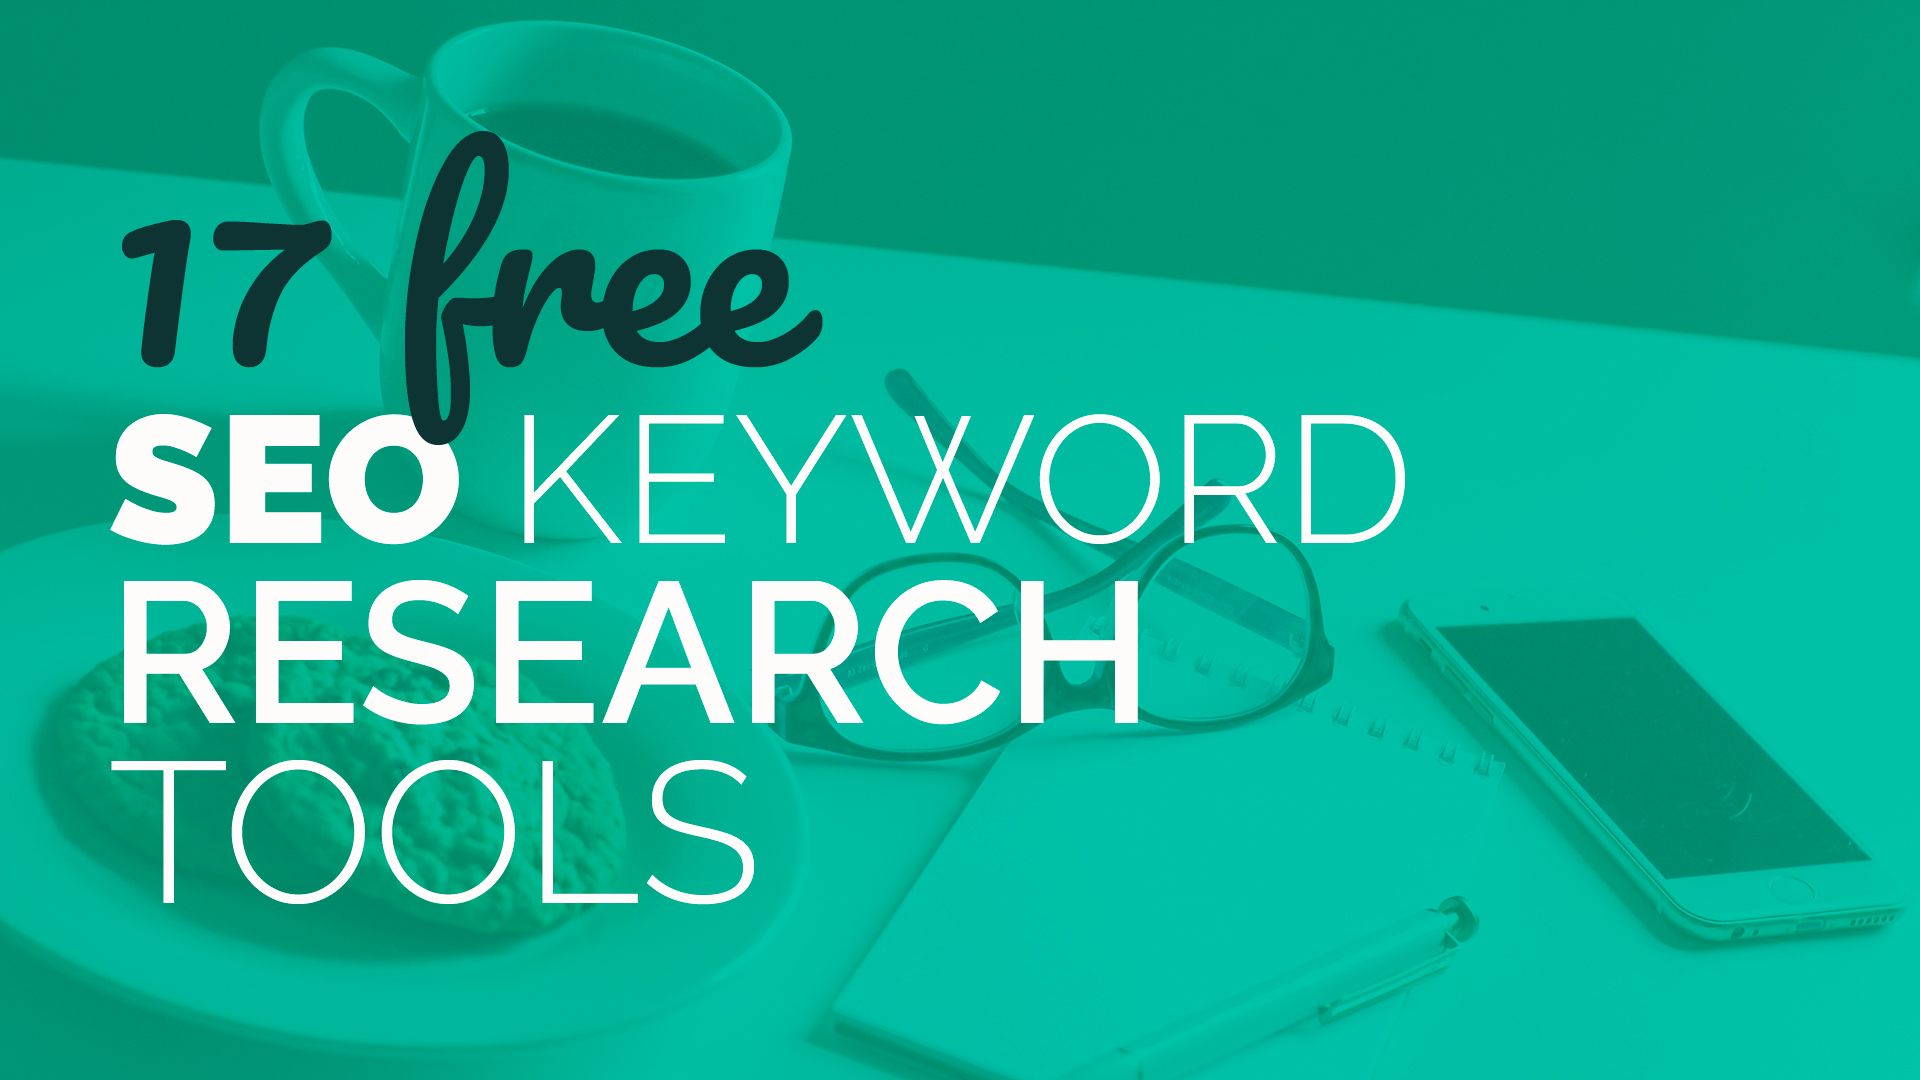 17 Free Seo Keyword Research Tools Lia Walsh Business Consultant